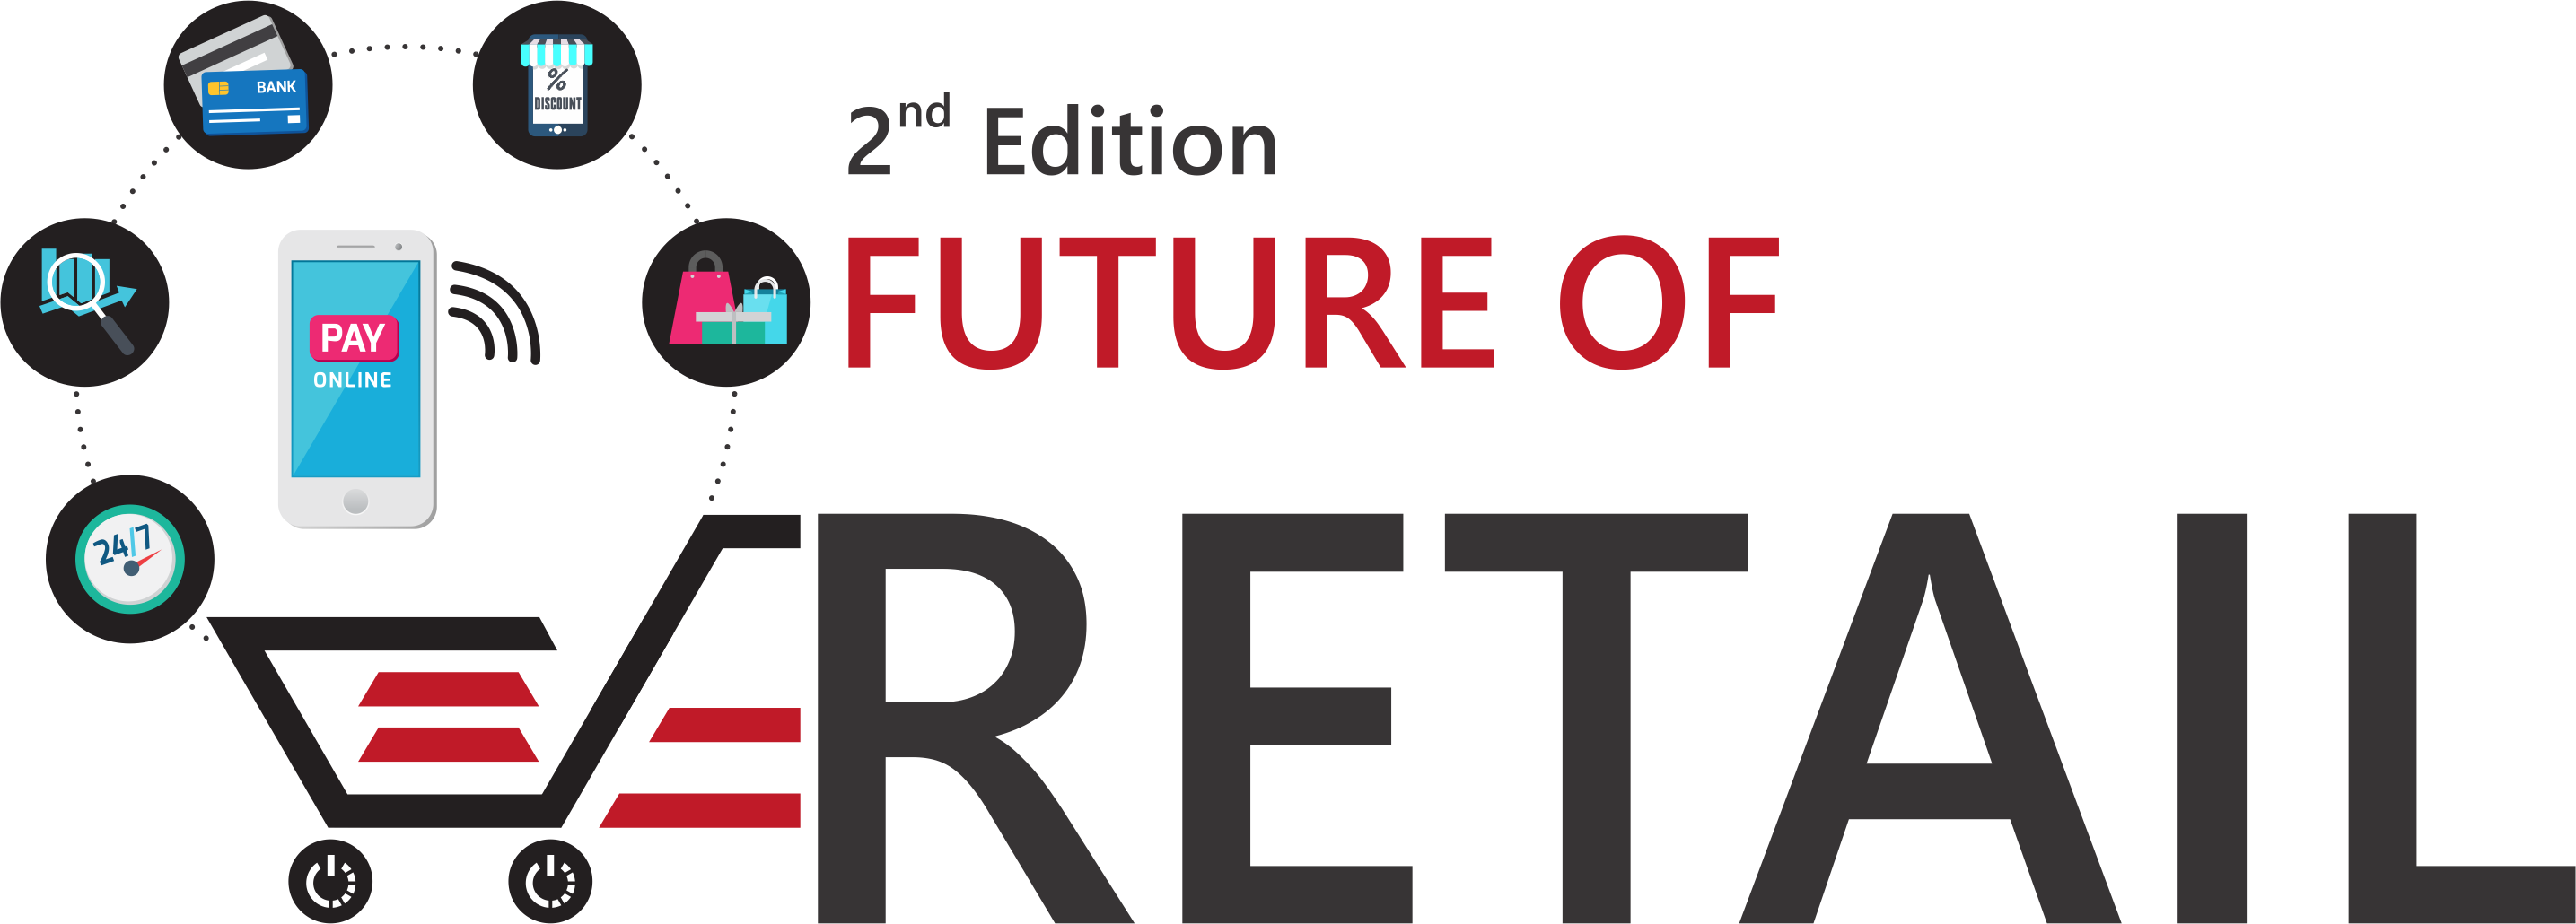 02nd Edition Future of Retail Summit & Awards 2019